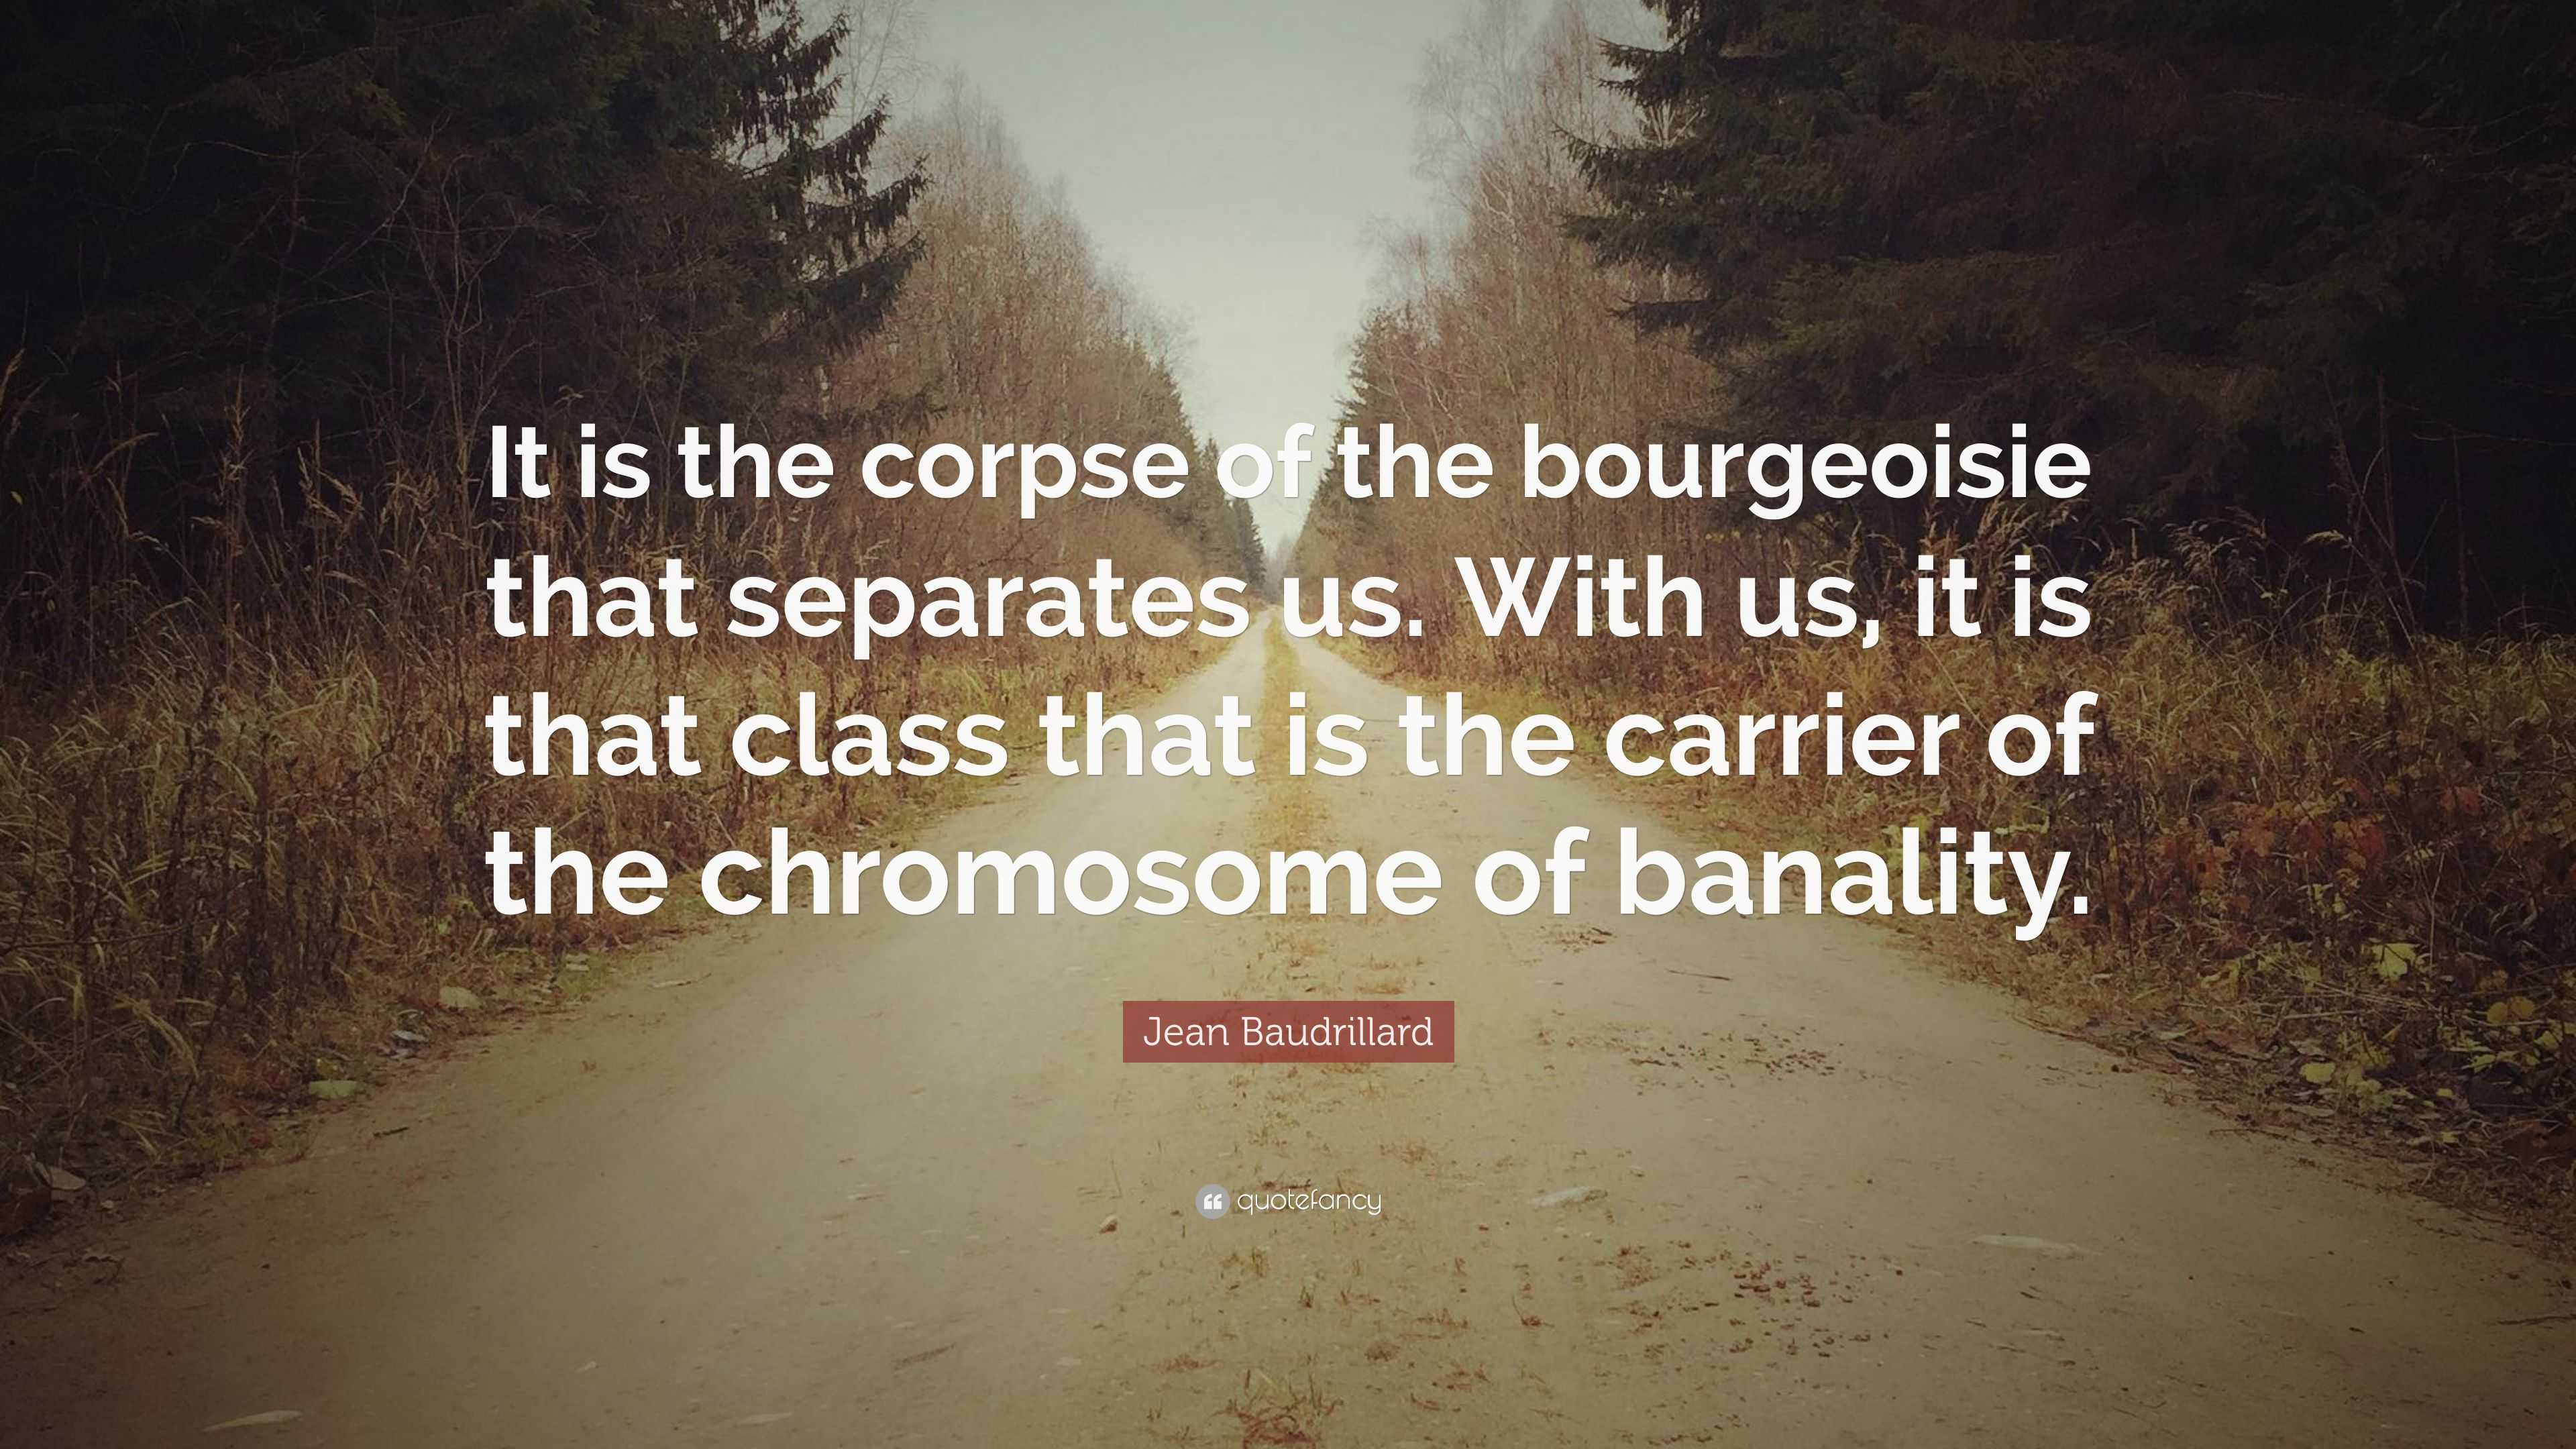 Jean Baudrillard Quote: “It is the corpse of the bourgeoisie that